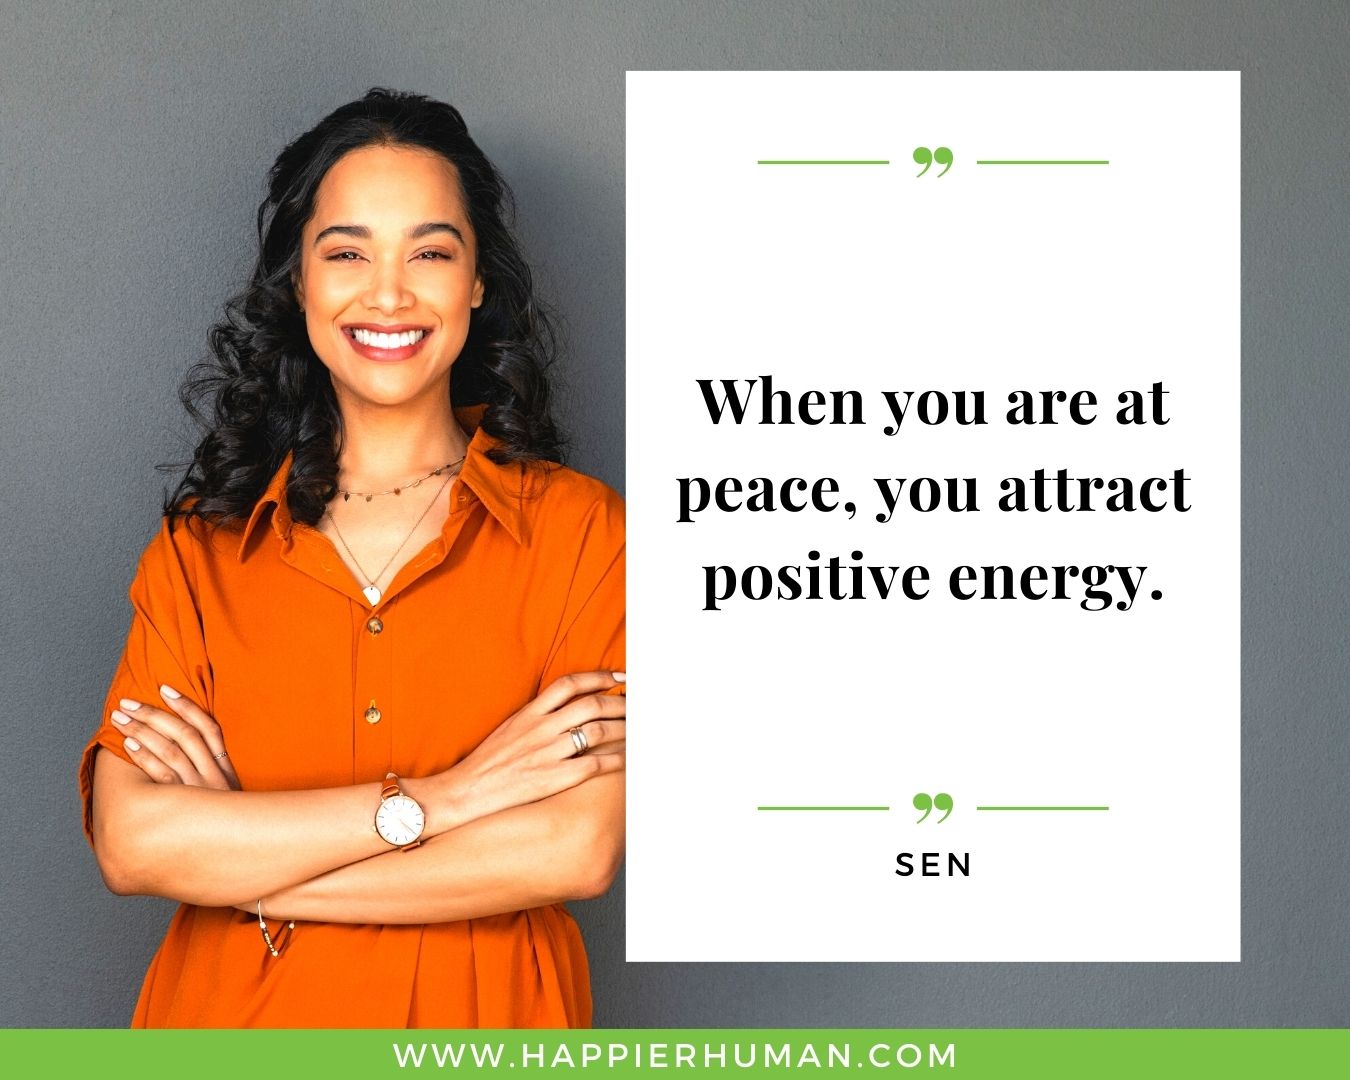 Positive Energy Quotes - “When you are at peace, you attract positive energy.” - Sen